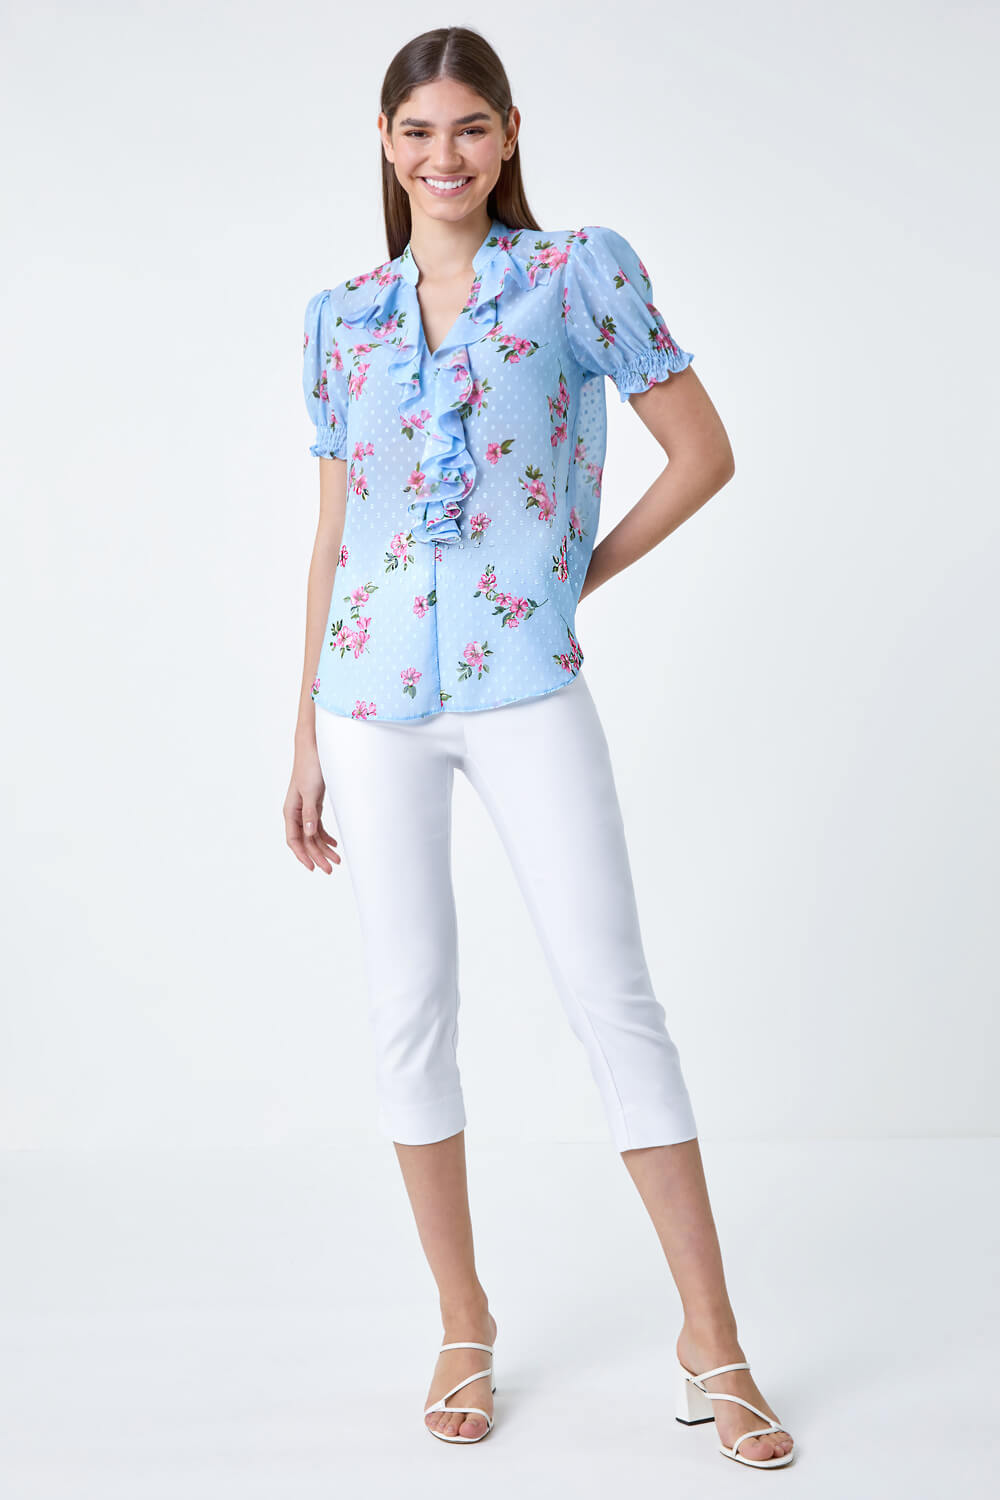 Blue Textured Spot Floral Print Frill Top, Image 4 of 5